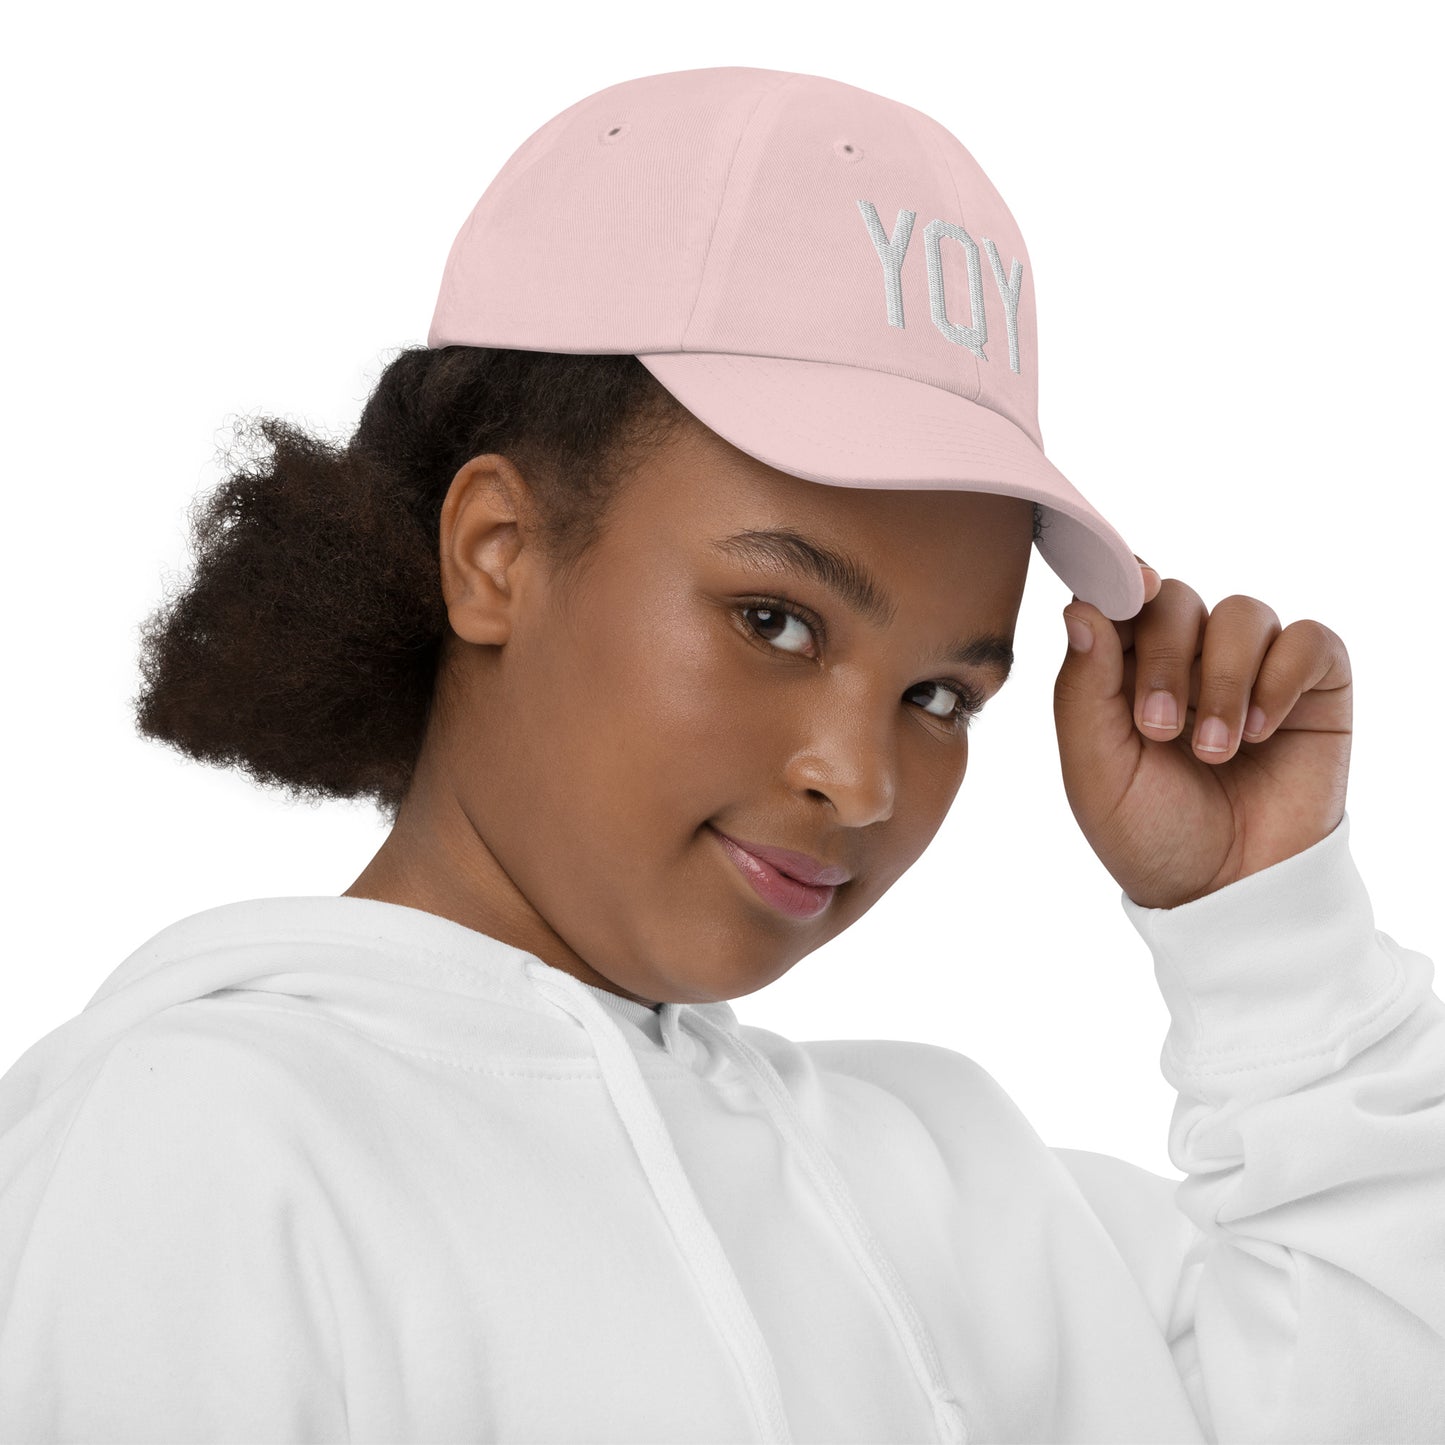 Airport Code Kid's Baseball Cap - White • YQY Sydney • YHM Designs - Image 09